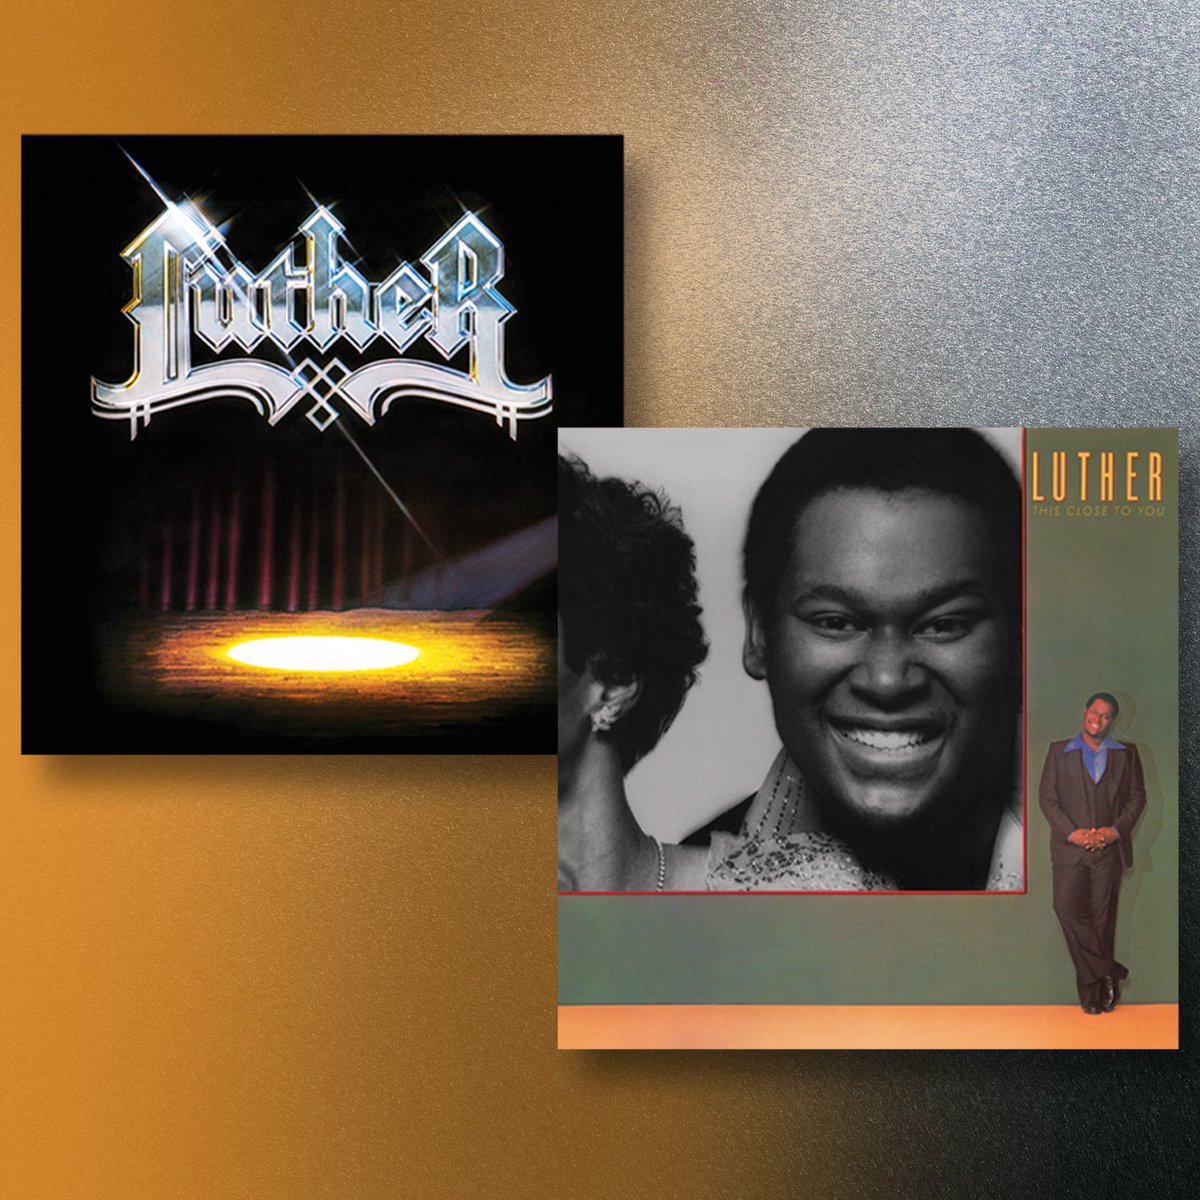 For the first time in over 40 years, Luther Vandross’ first two albums are being re-released. ‘Luther’ and ‘This Close to You,” originally released on Cotillion Records, will be available in vinyl, CD, and digital formats in April and June, respectively.